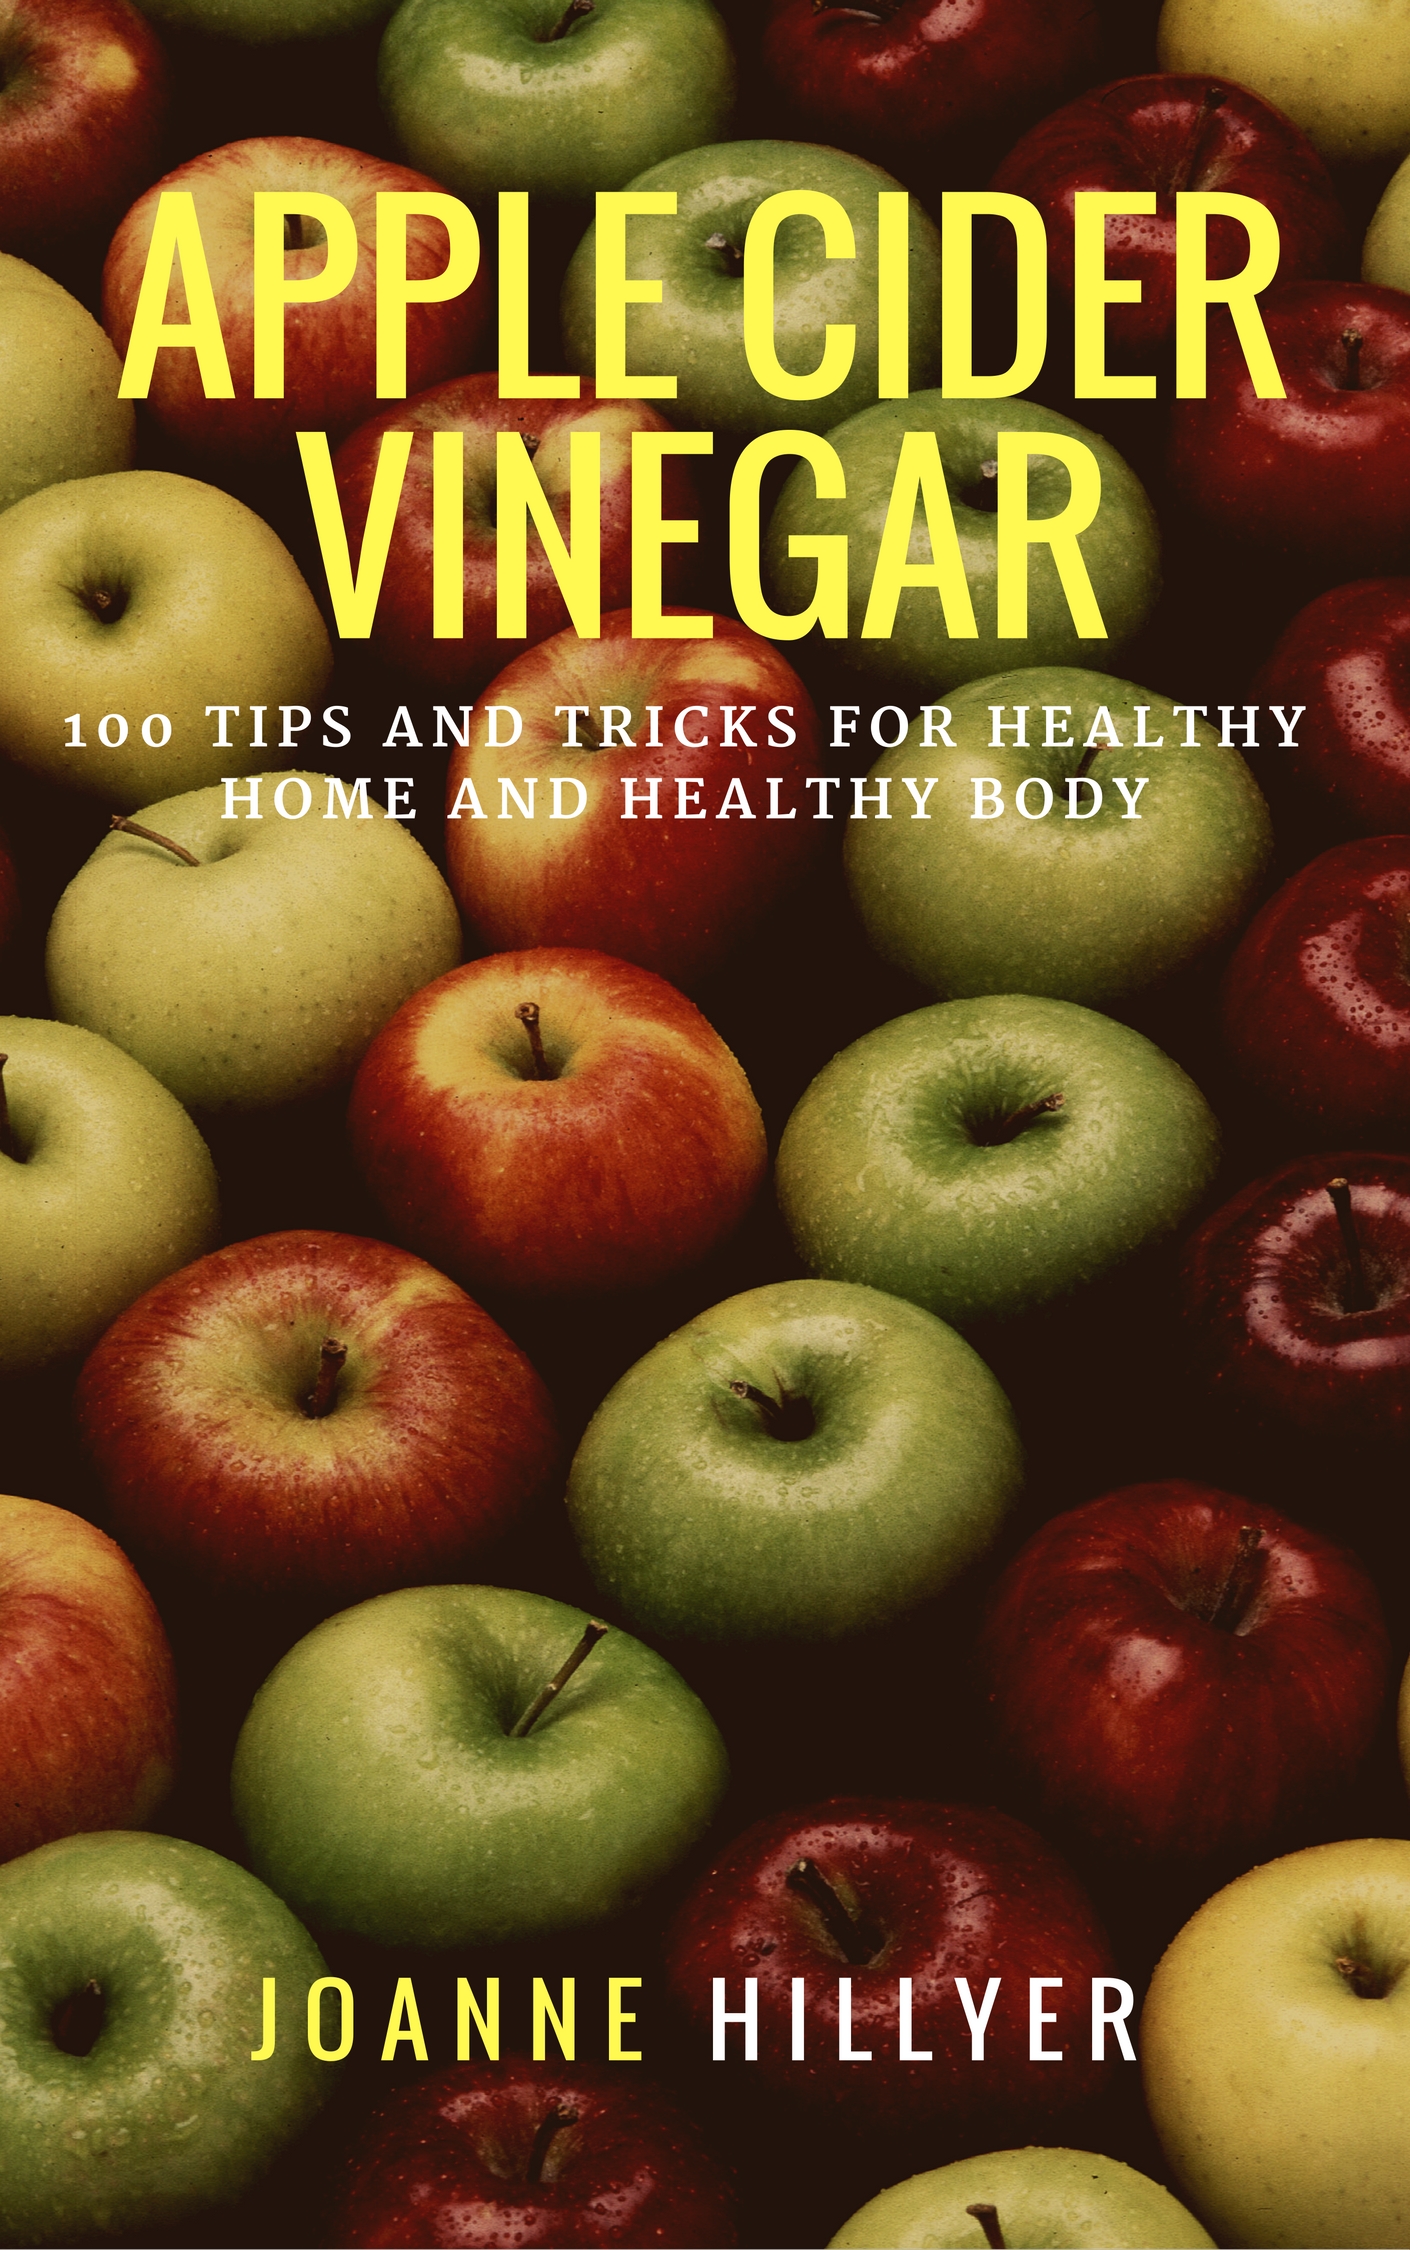 FREE: Apple Cider Vinegar: 100+ Tips and Tricks for Healthy Home and Healthy Body by Joanne Hillyer